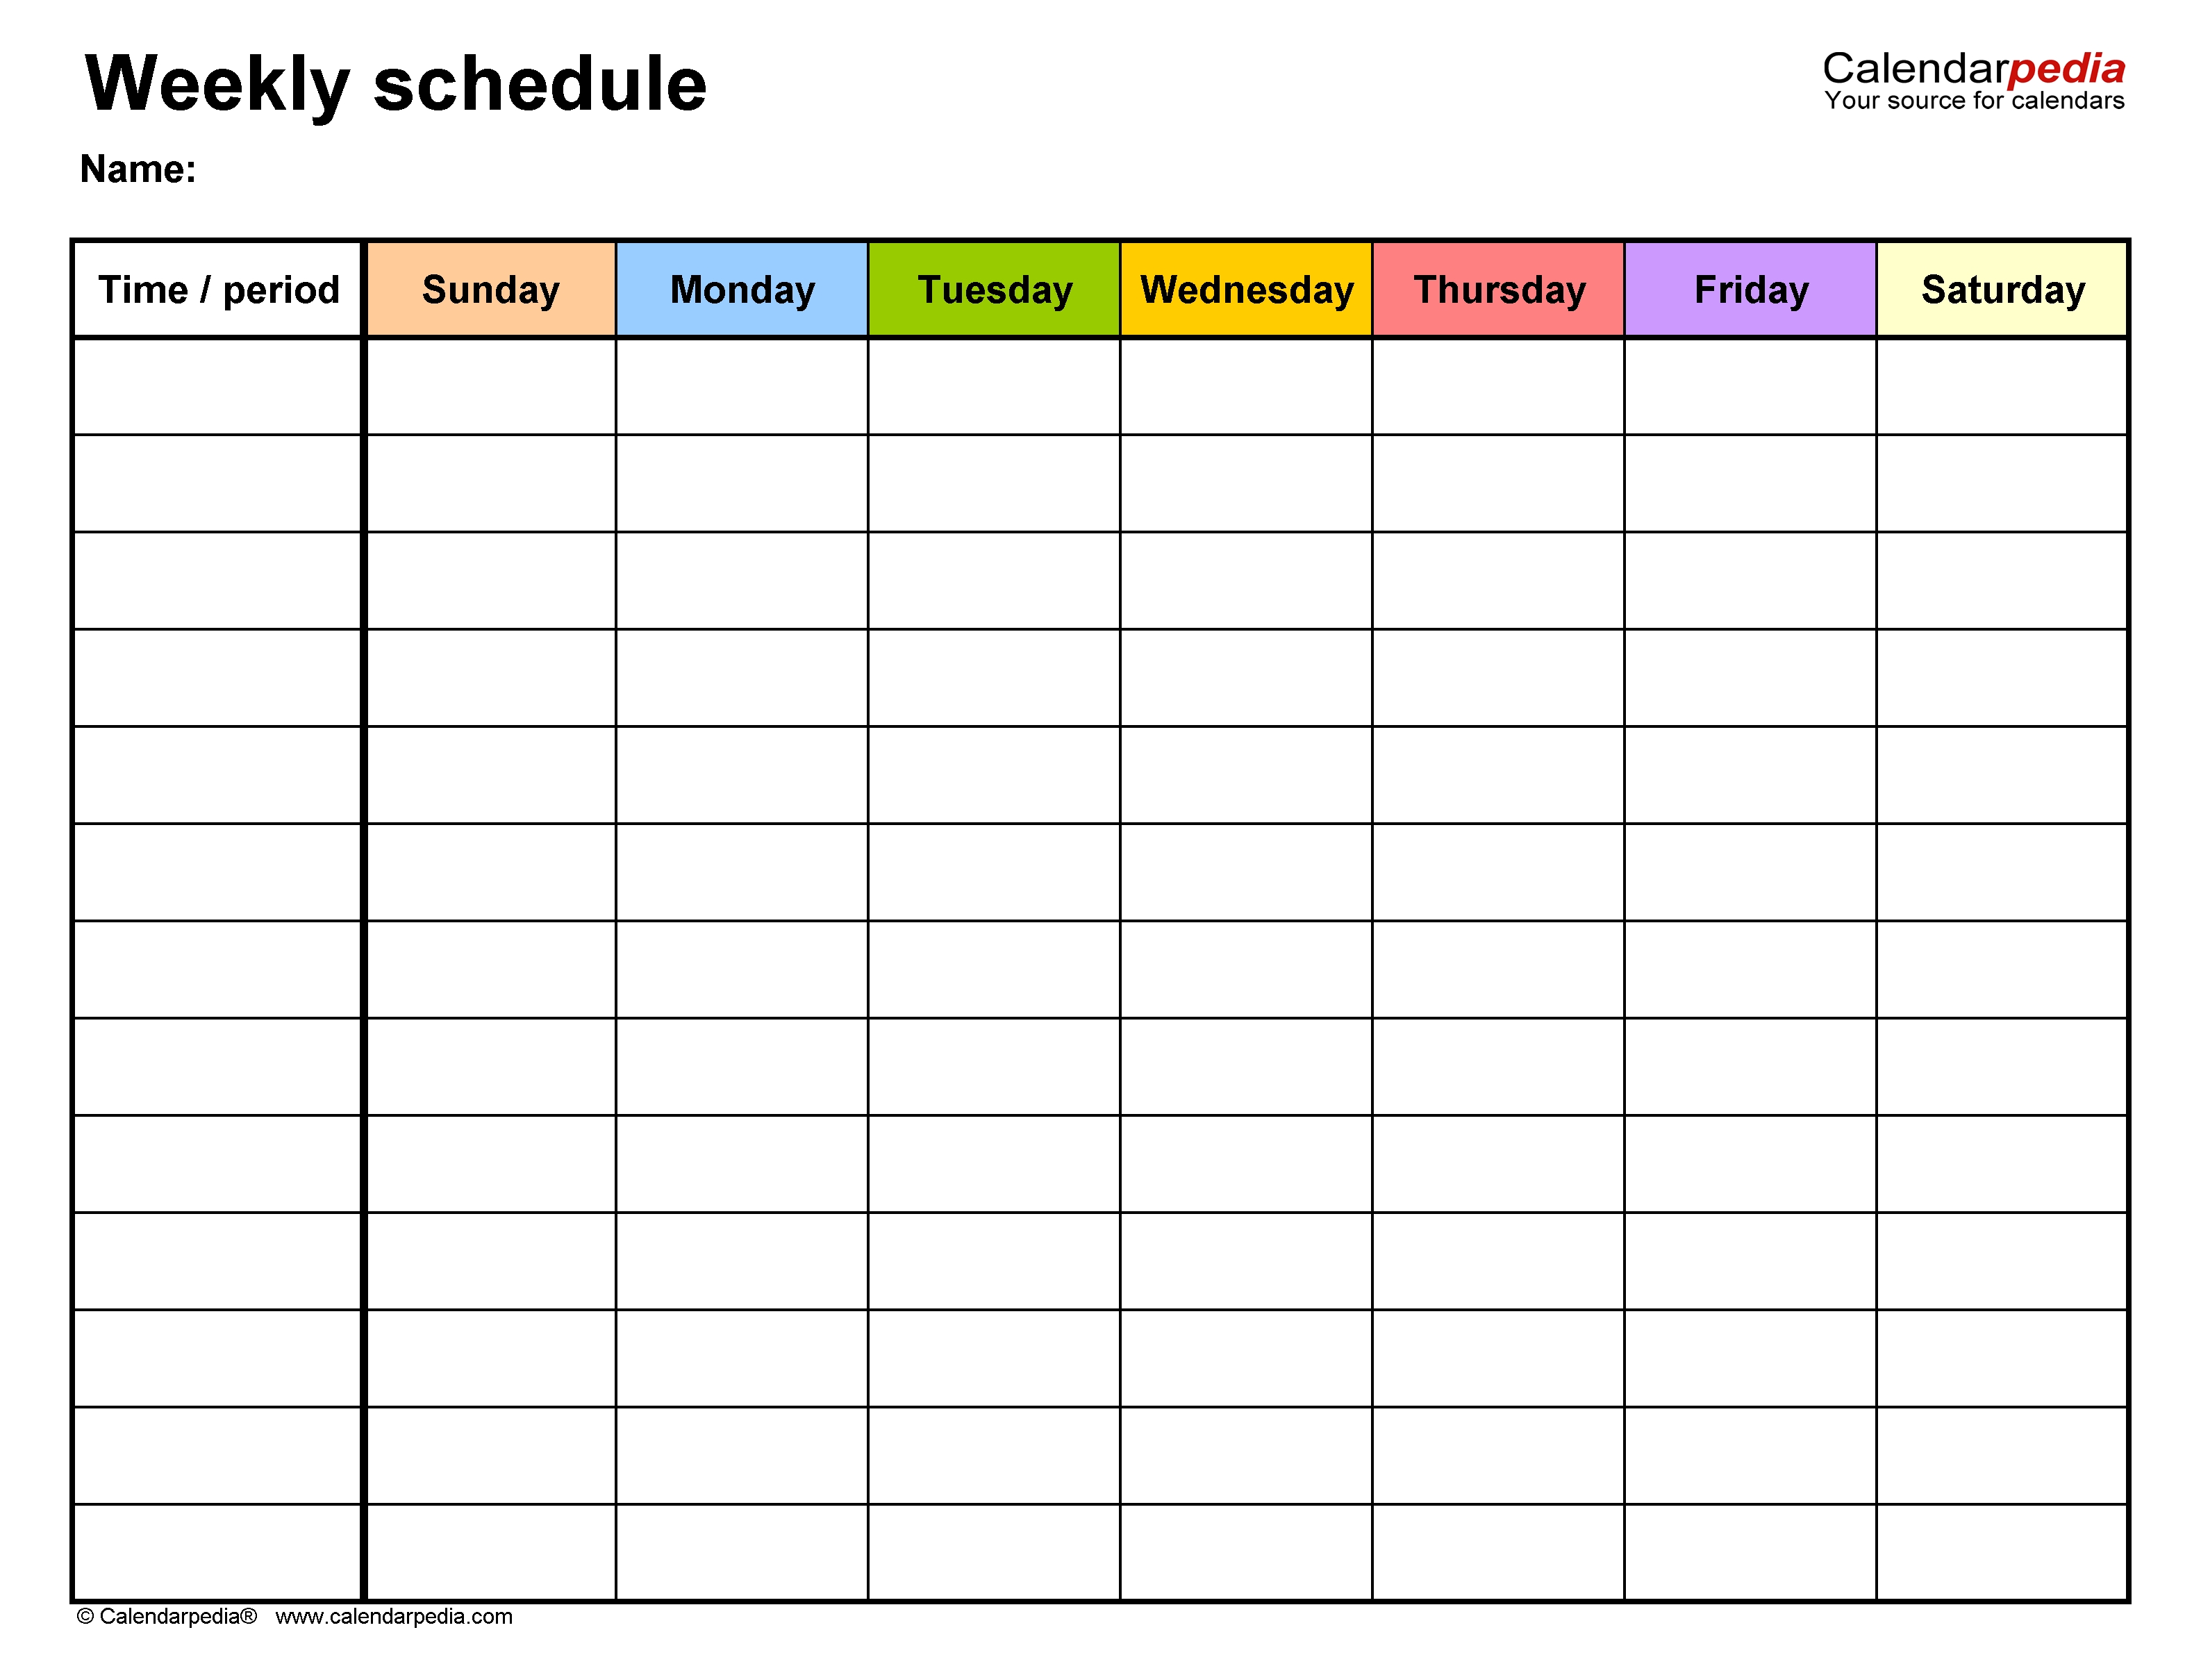 Free Weekly Schedule Templates For Word - 18 Templates Calendar Template Days Of The Week